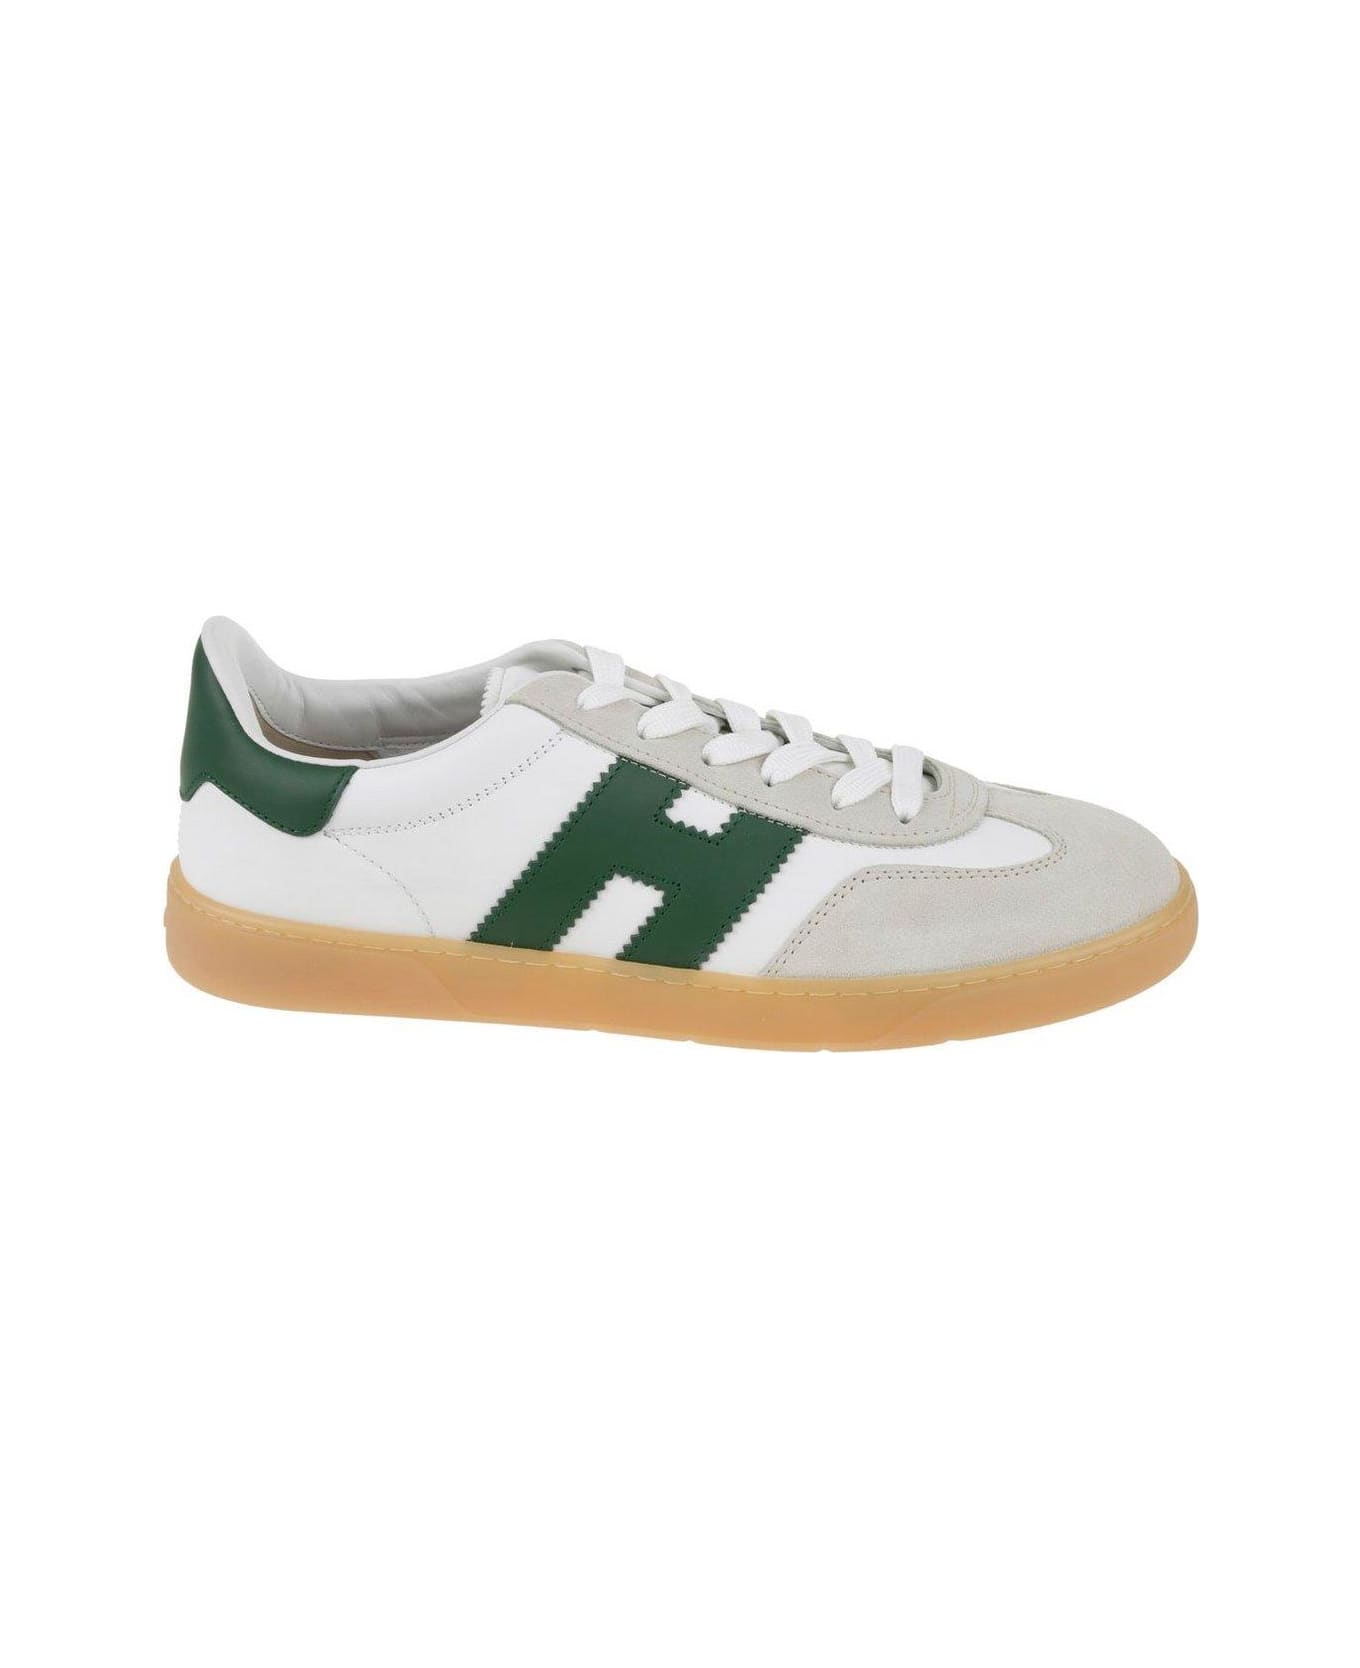 Hogan Cool Side H Patch Sneakers - R Bianco/verde